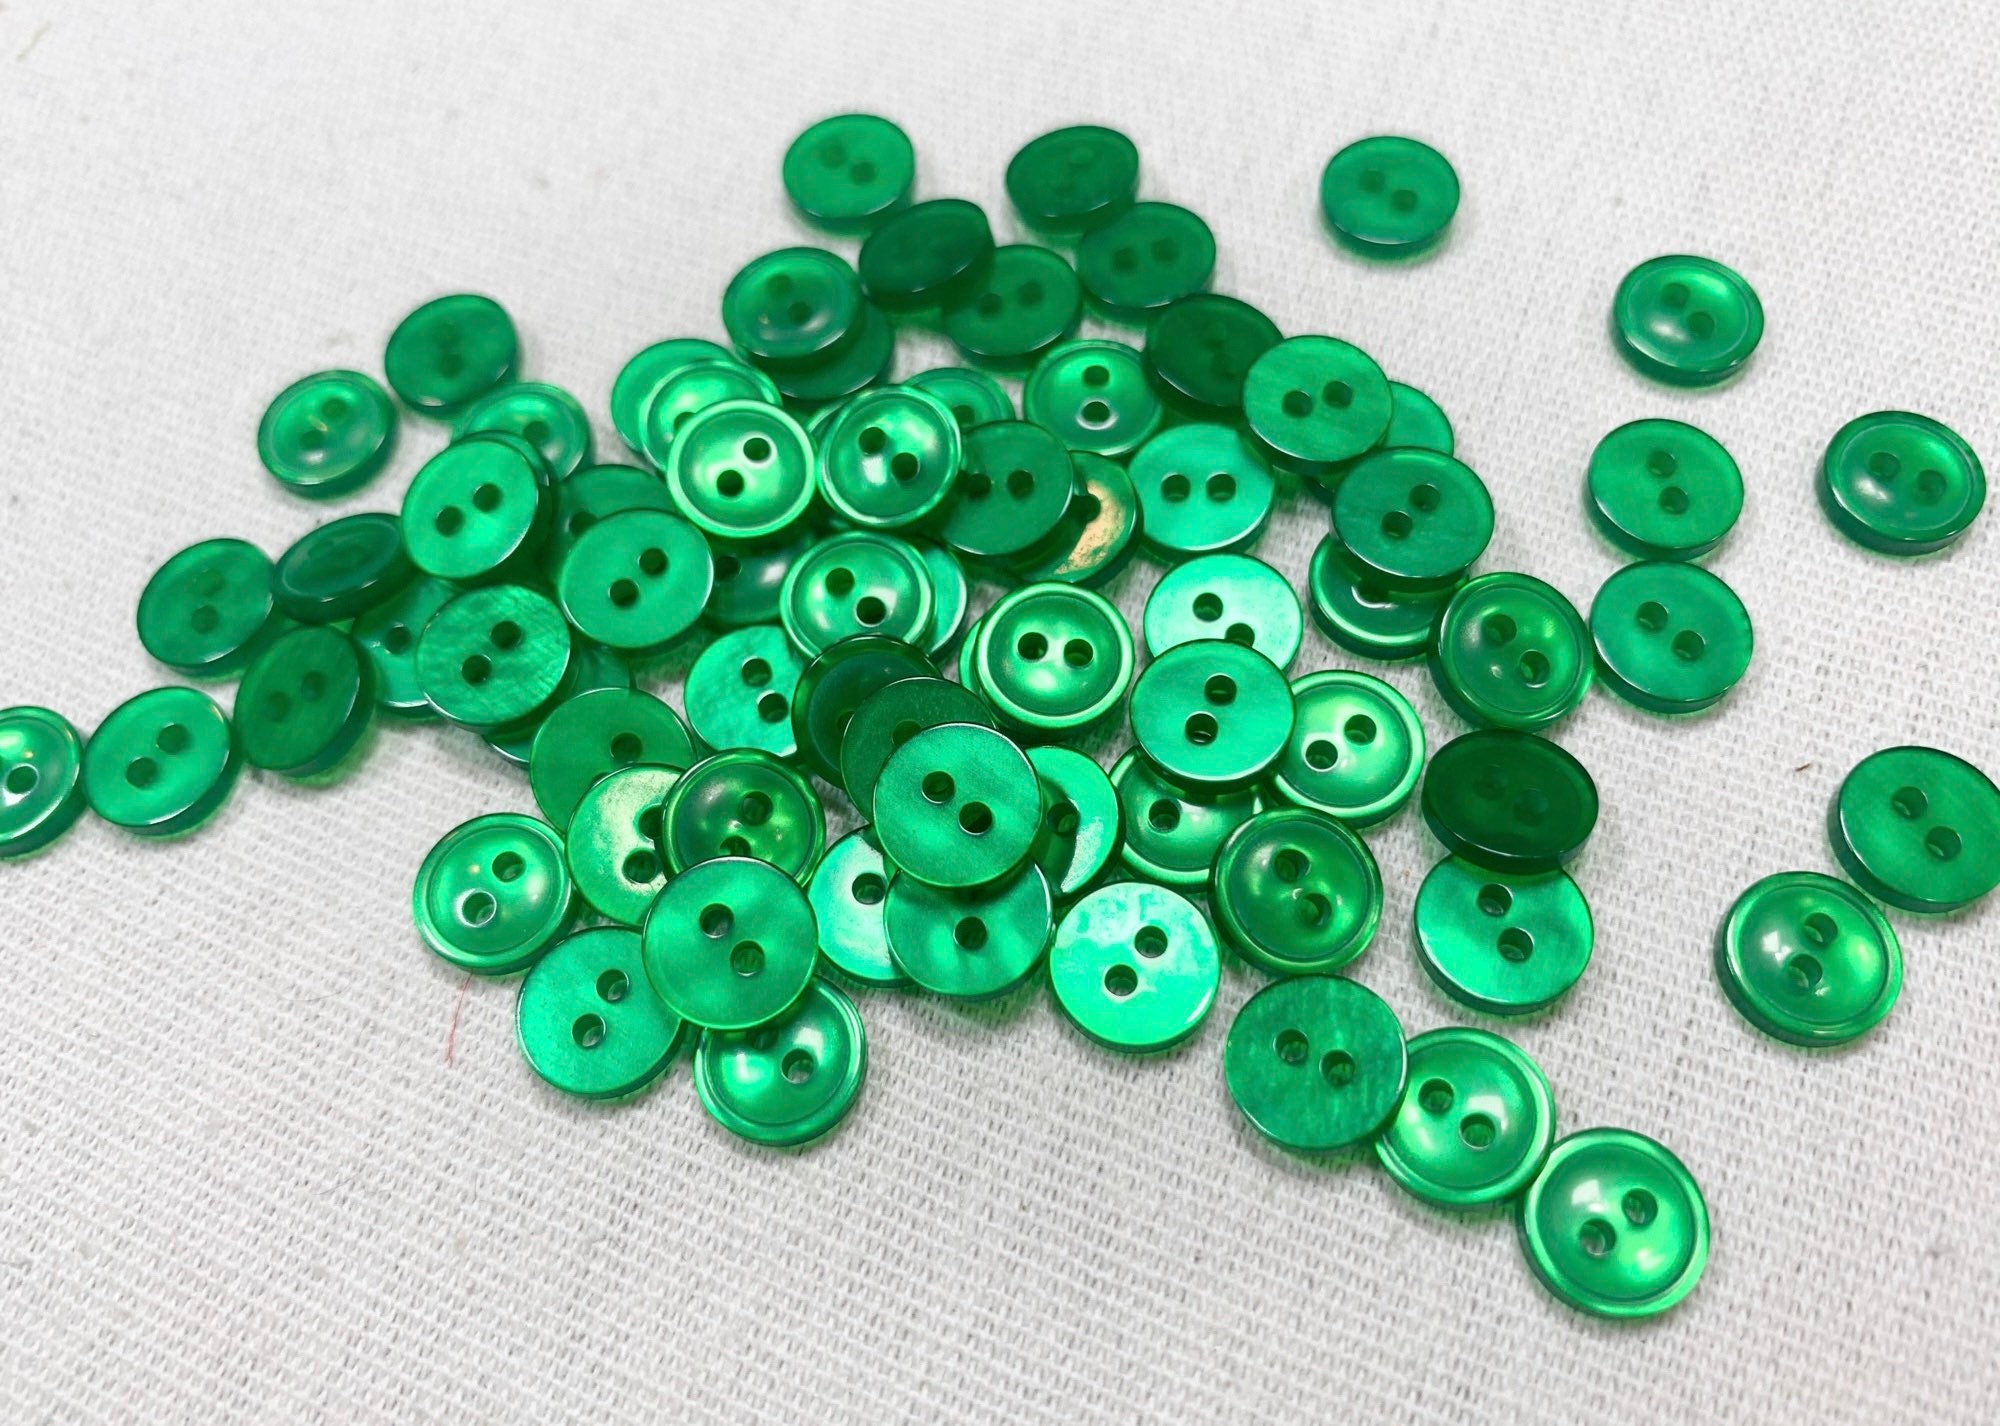 60pcs Green Buttons Sewing Plastic Resin 1inch Buttons for Crafts Flatback Large Green Buttons 4 Holes DIY Craft Sewing Buttons (Green 25mm/1inch)